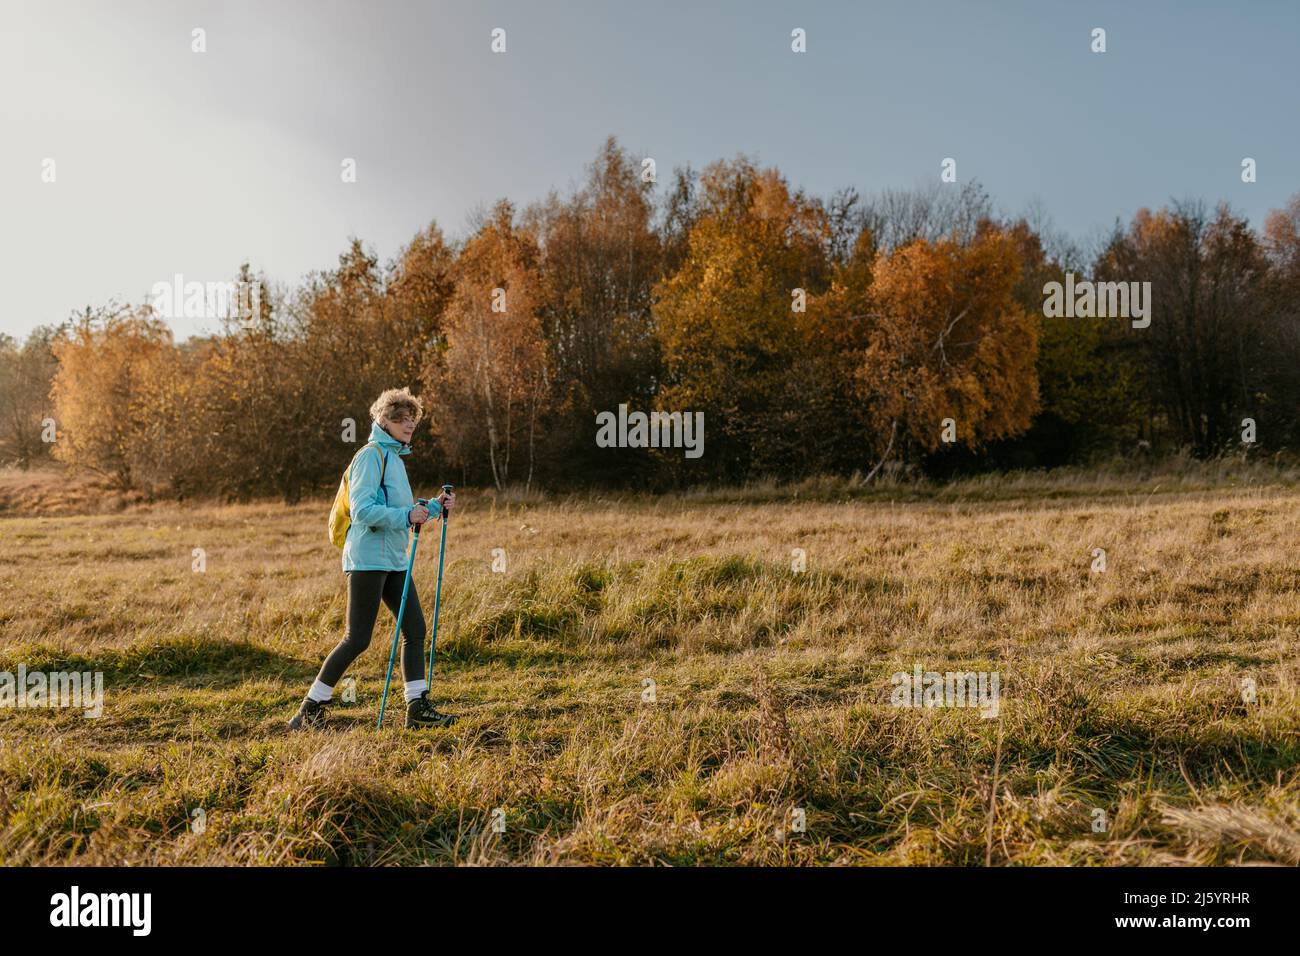 Elderly Woman with Hiking Sticks Walking in Countryside. Full Length Shot of Senior Female Hiker Practicing Nordic Walking on Sunny Autumn Day. Stock Photo